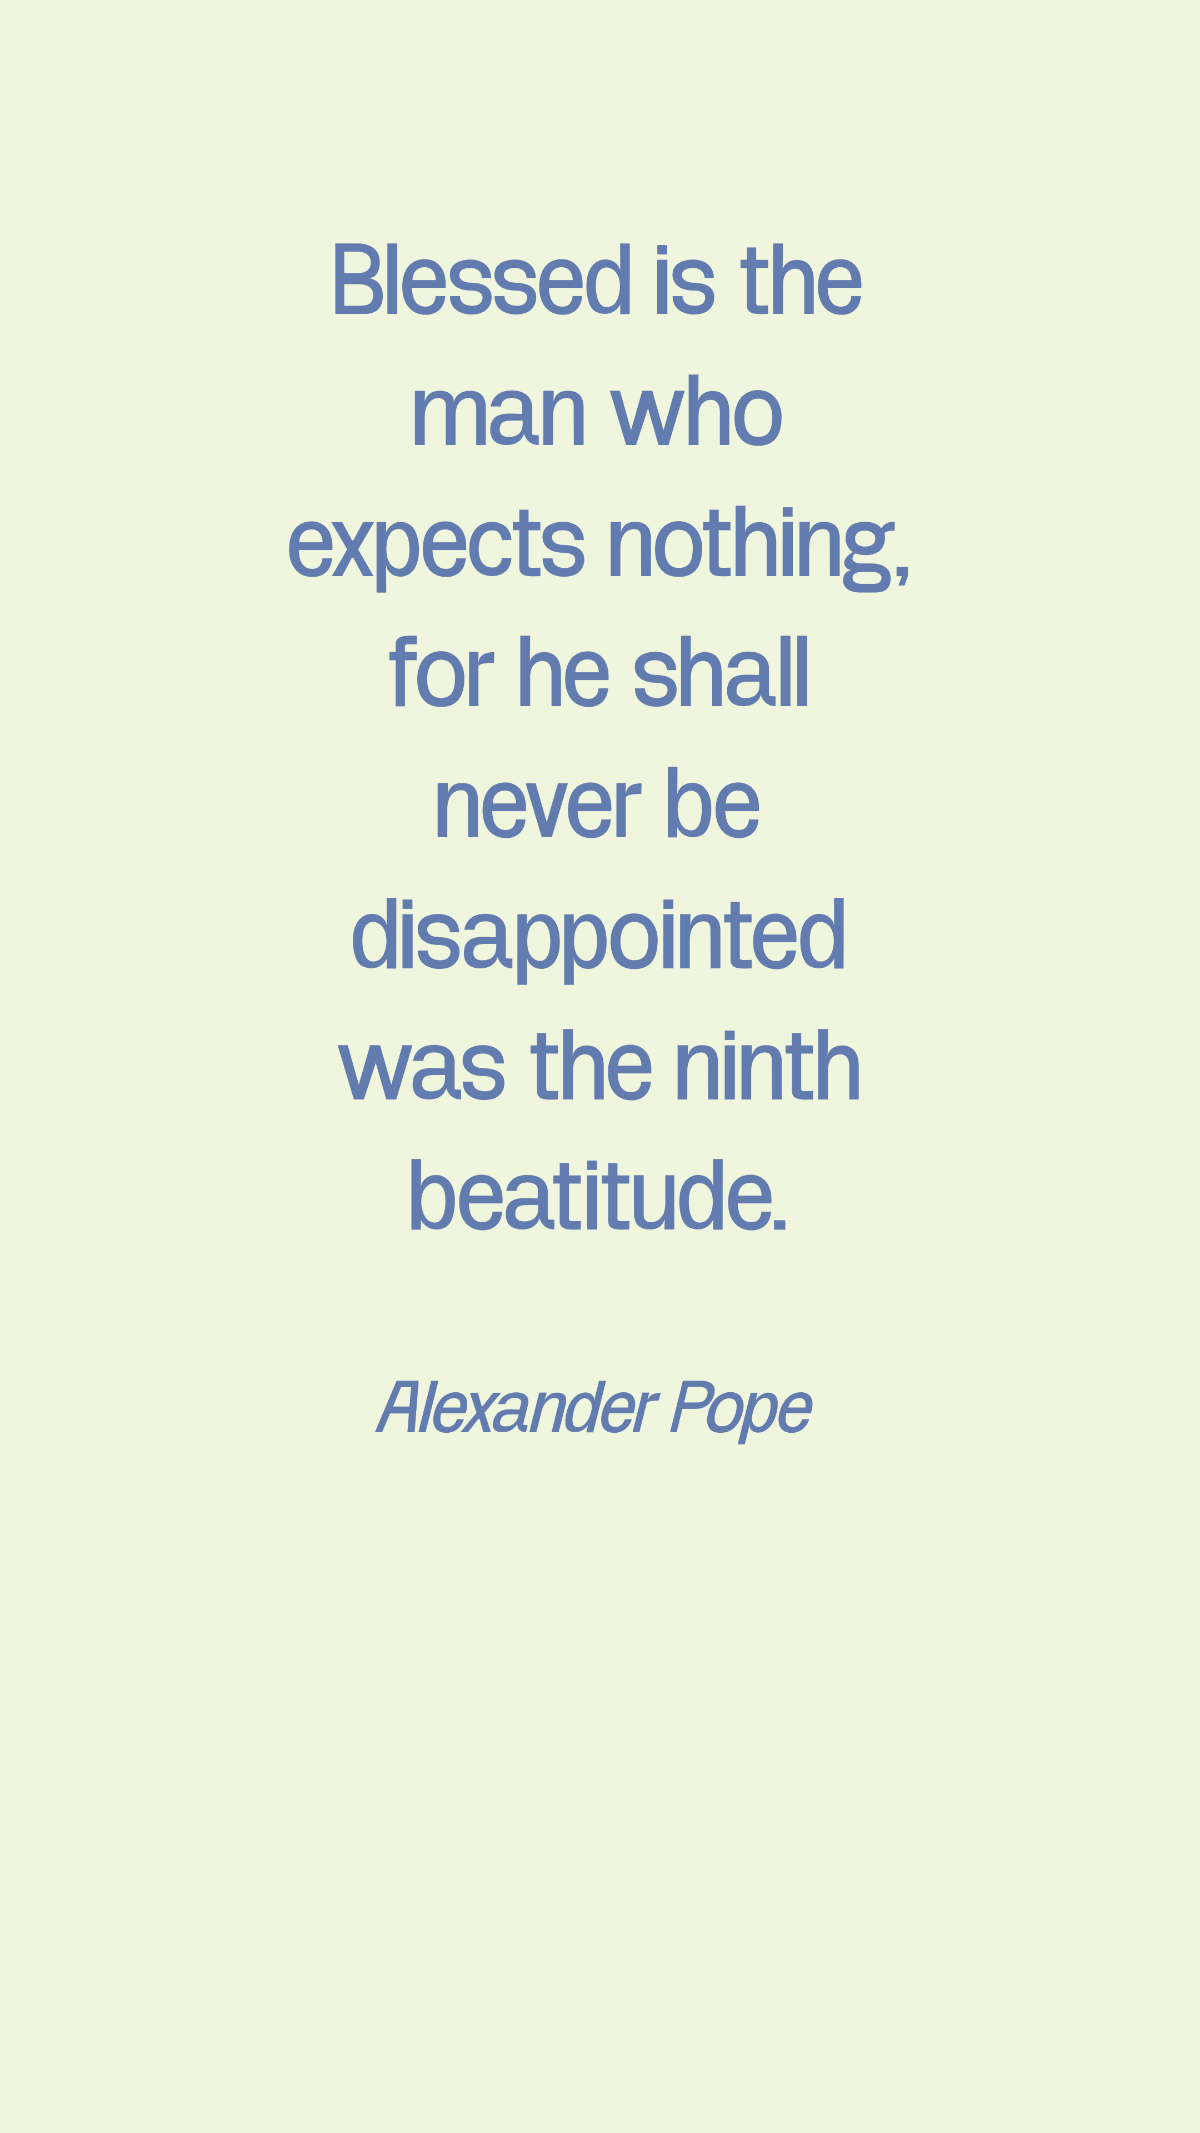 Alexander Pope - Blessed is the man who expects nothing, for he shall never be disappointed was the ninth beatitude. Template